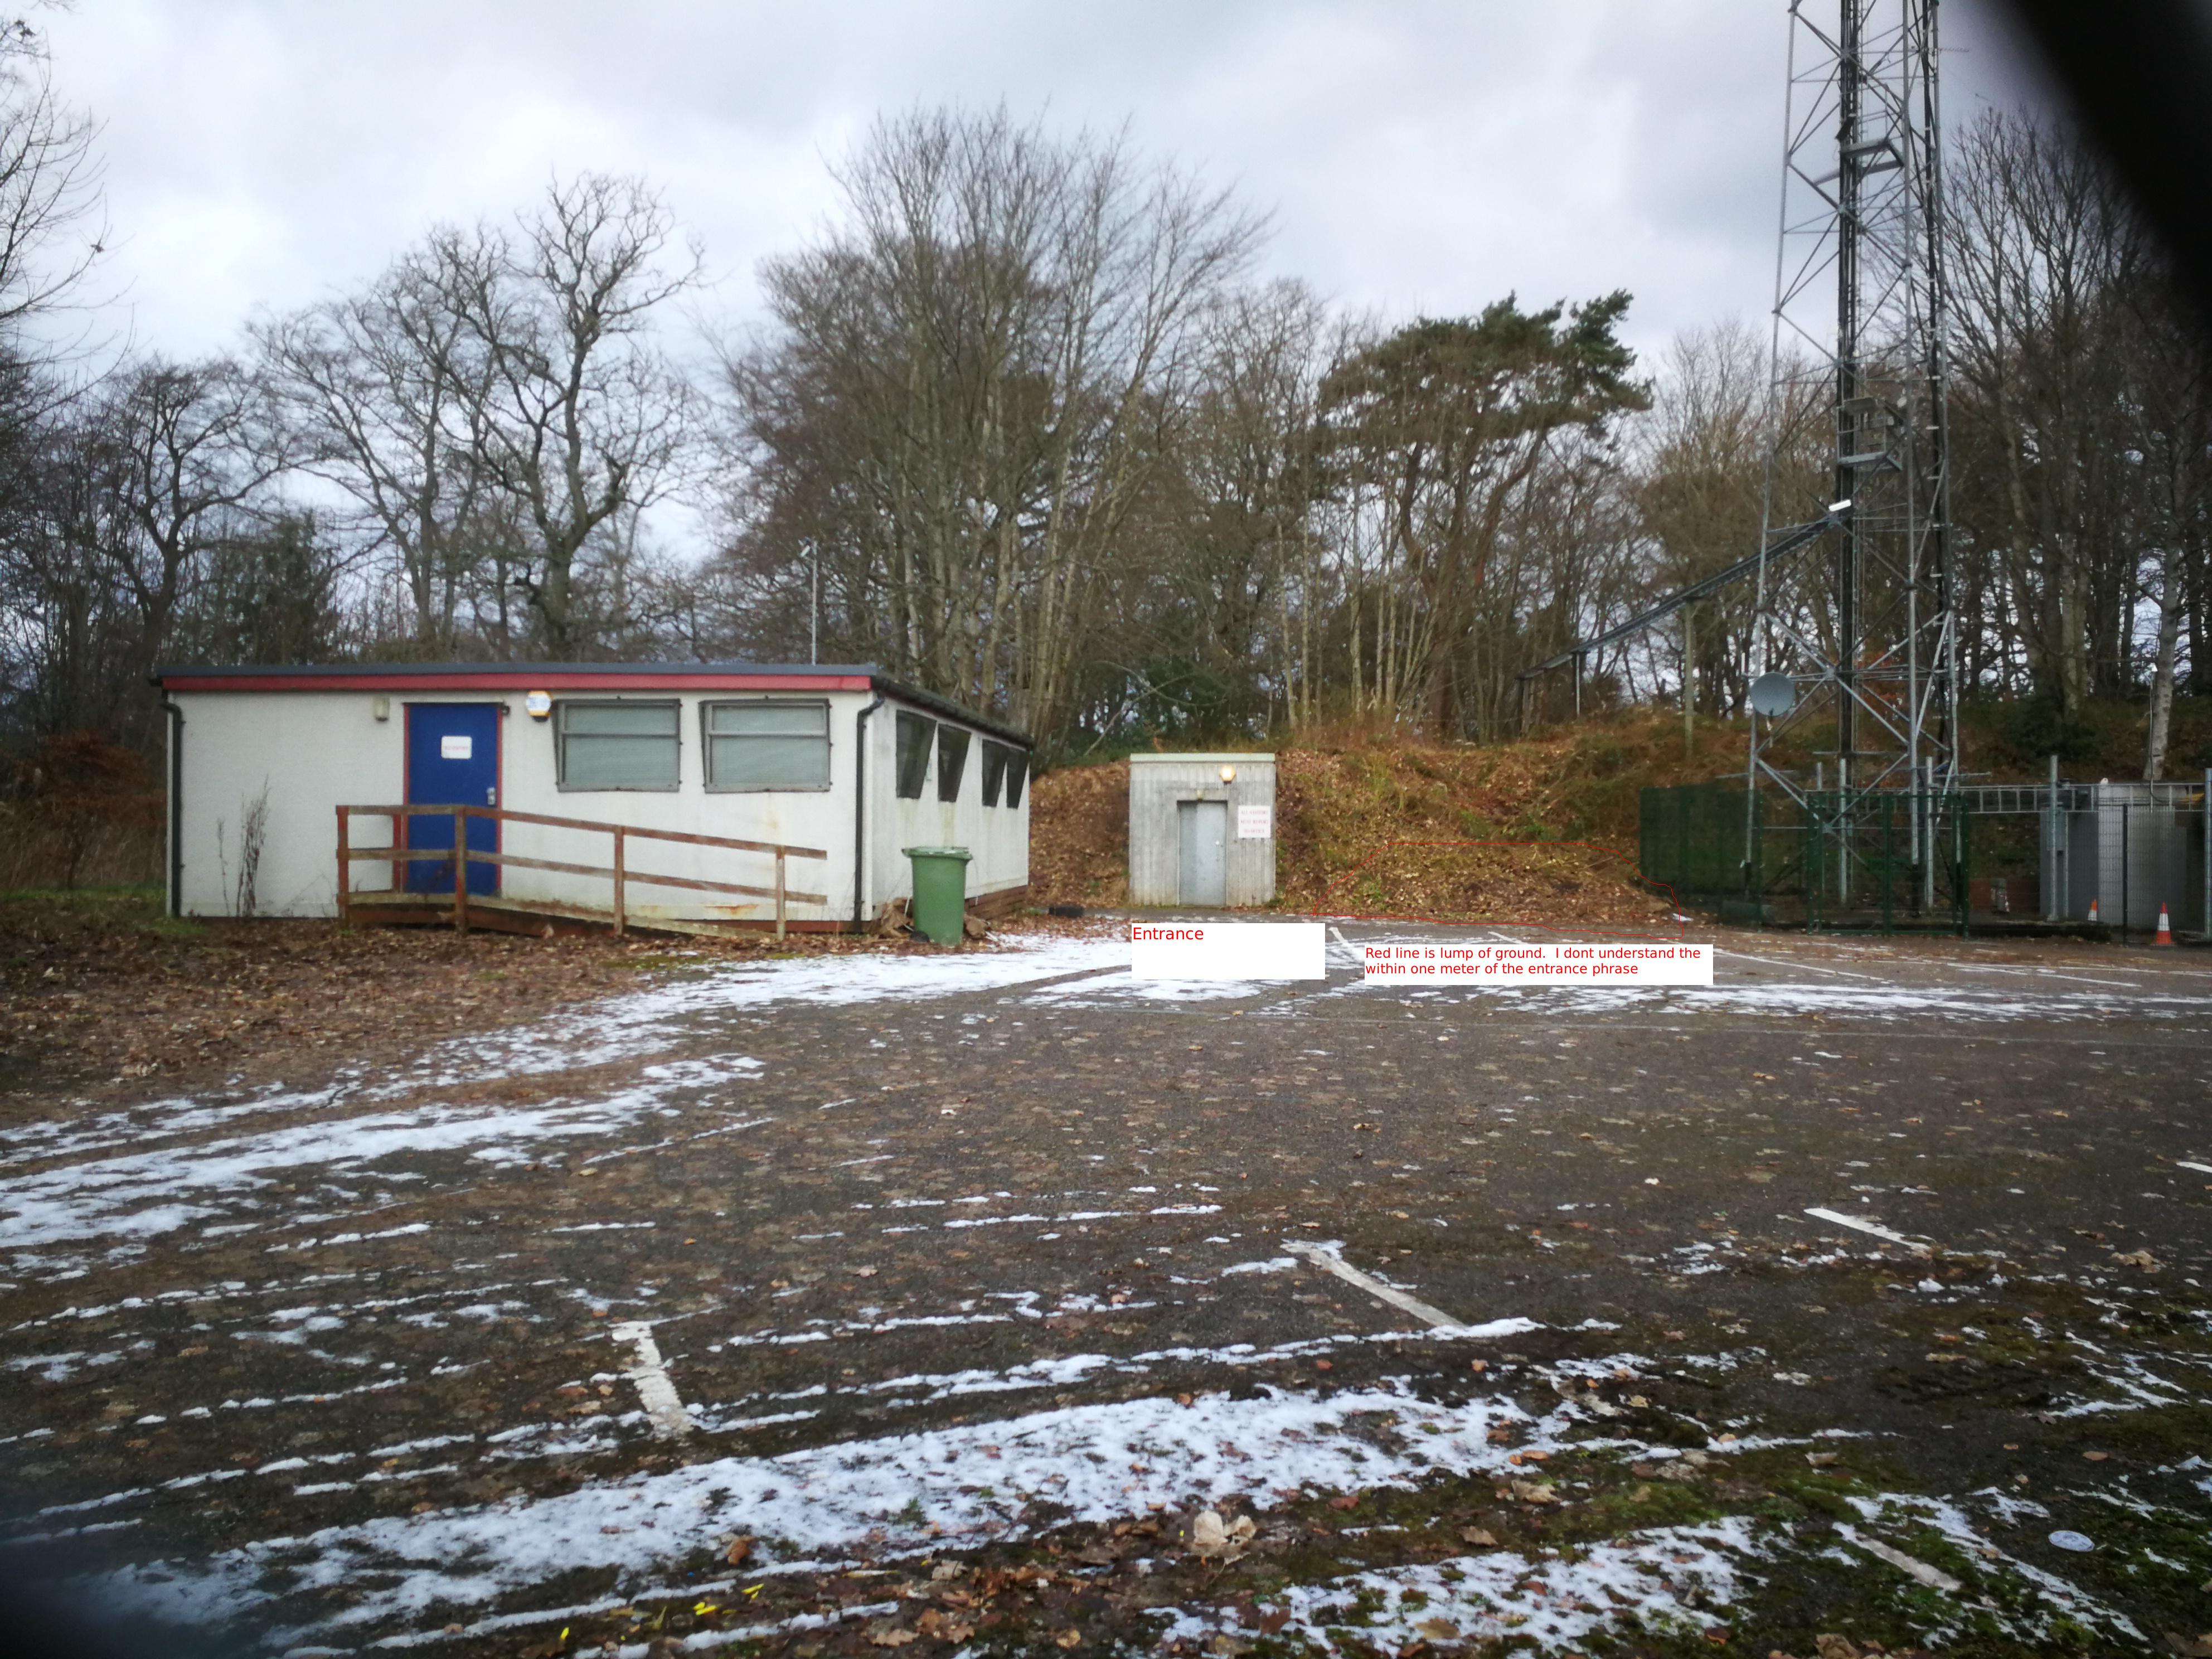 Inverness Nuclear Bunker  circa 2018 - outside view